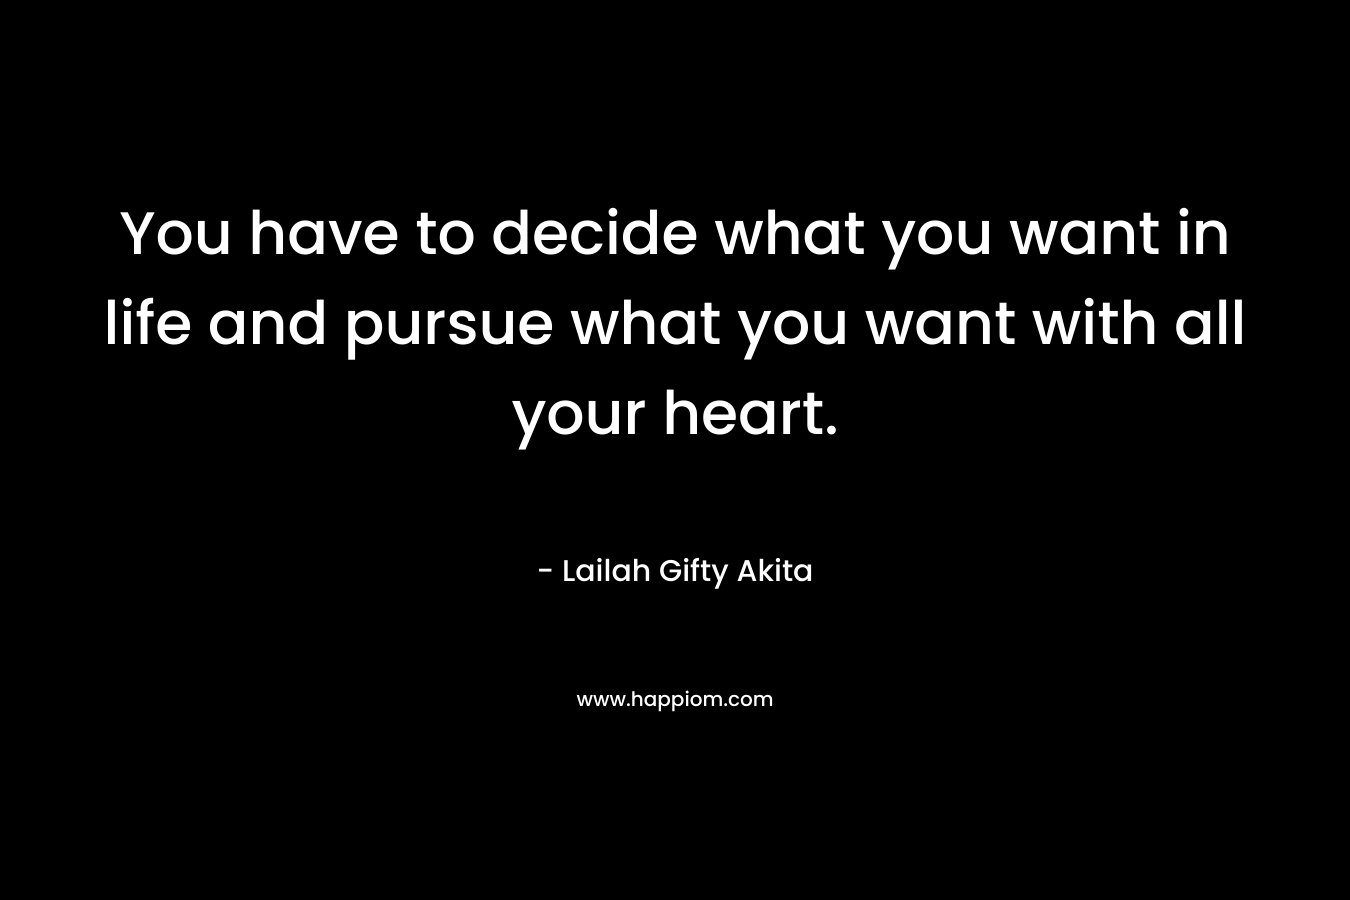 You have to decide what you want in life and pursue what you want with all your heart. – Lailah Gifty Akita